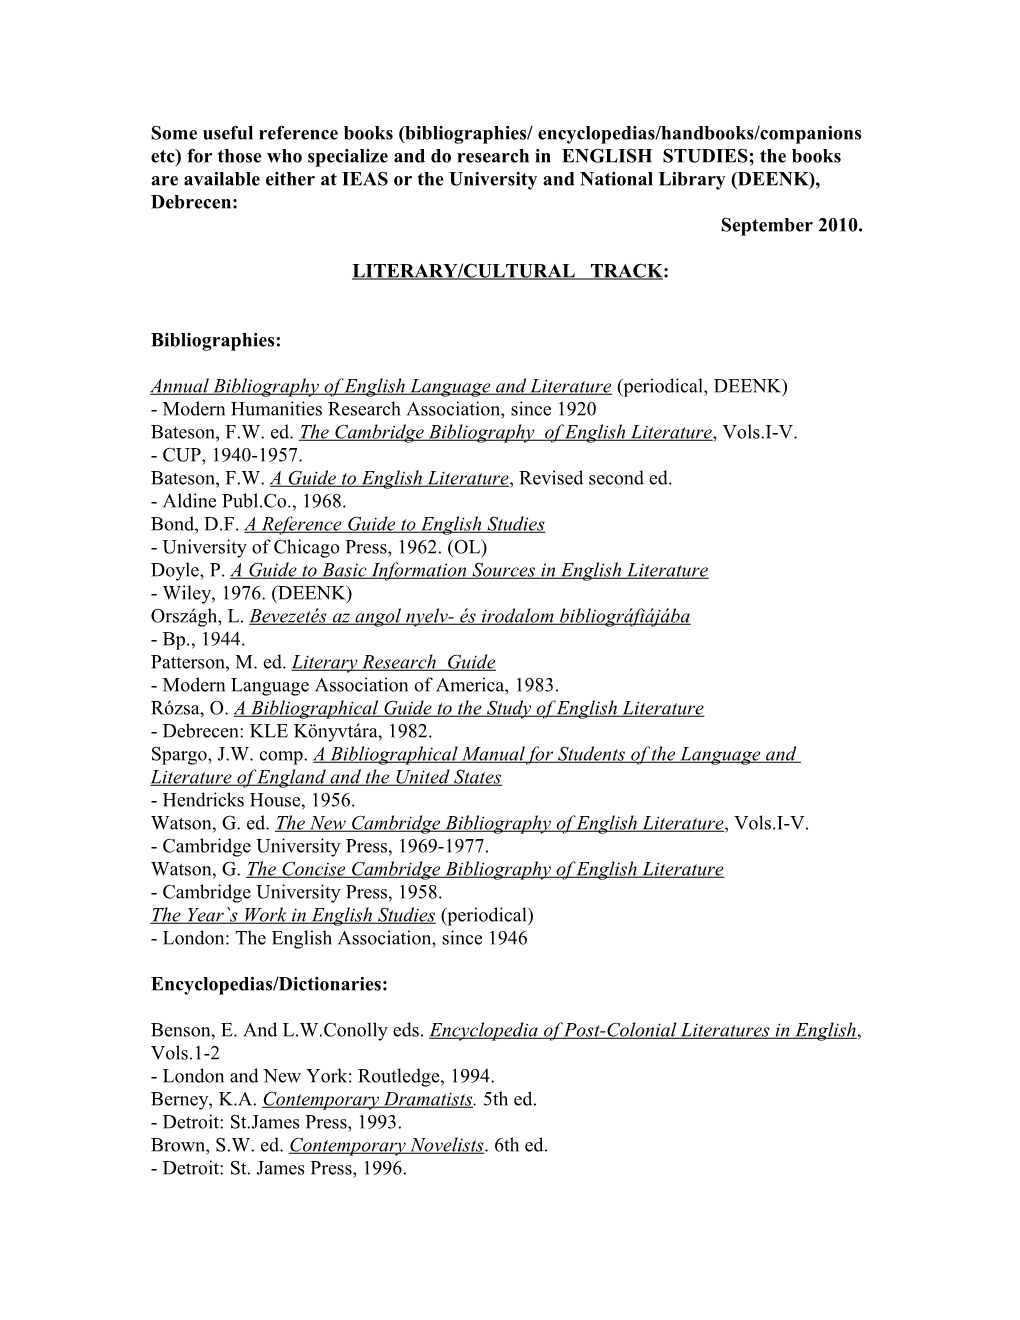 Some Useful Reference Books (Bibliographies/Handbooks/Encyclopedias) for Those Who Specialize